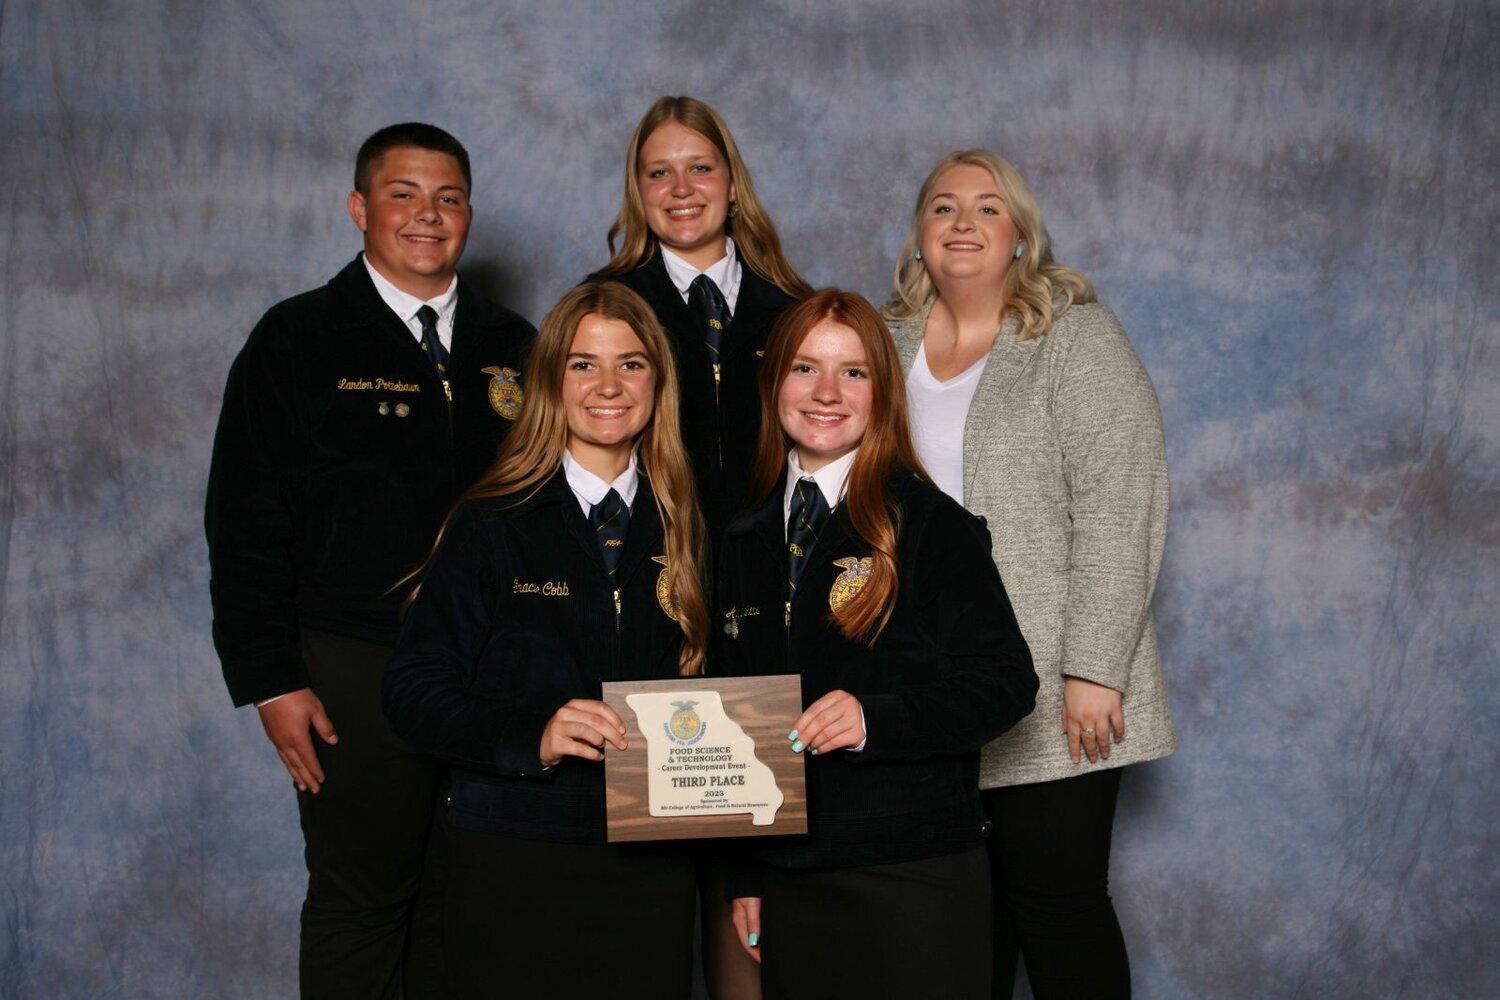 The Montgomery County FFA chapter placed third in the food science career development event at the Missouri FFA Convention in April in Columbia. Pictured are, front row from left, Gracie Cobb and Ava Rakers. Back row are Landon Pottebaum, Avery Ridgley and adviser Reagan Limback.